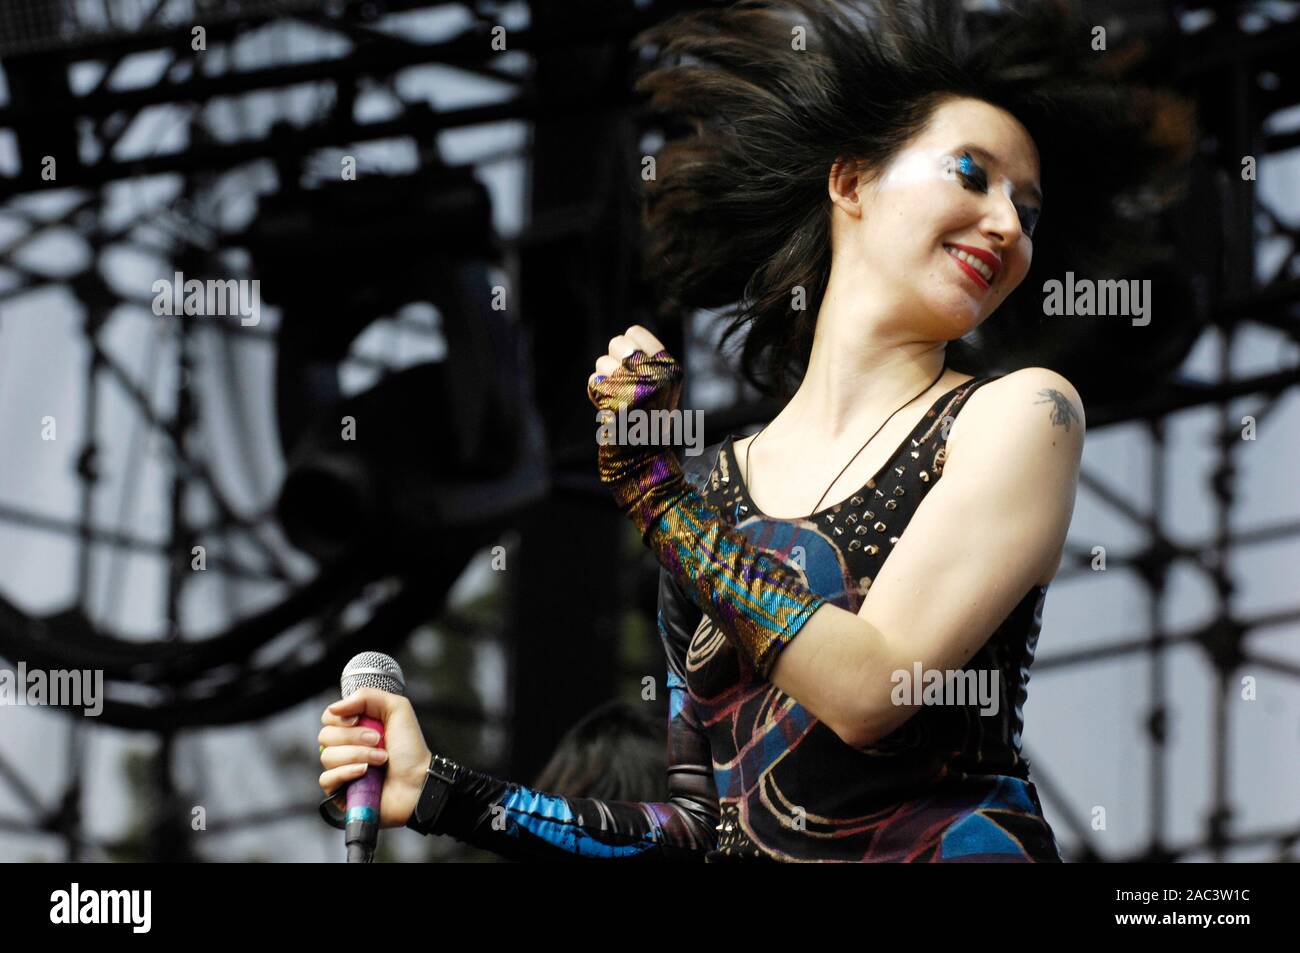 Karen O of the Yeah Yeah Yeahs performs at The 2009 KROQ Weenie Roast Y Fiesta at Verizon Wireless Amphitheater on May 16, 2009 in Irvine. Stock Photo